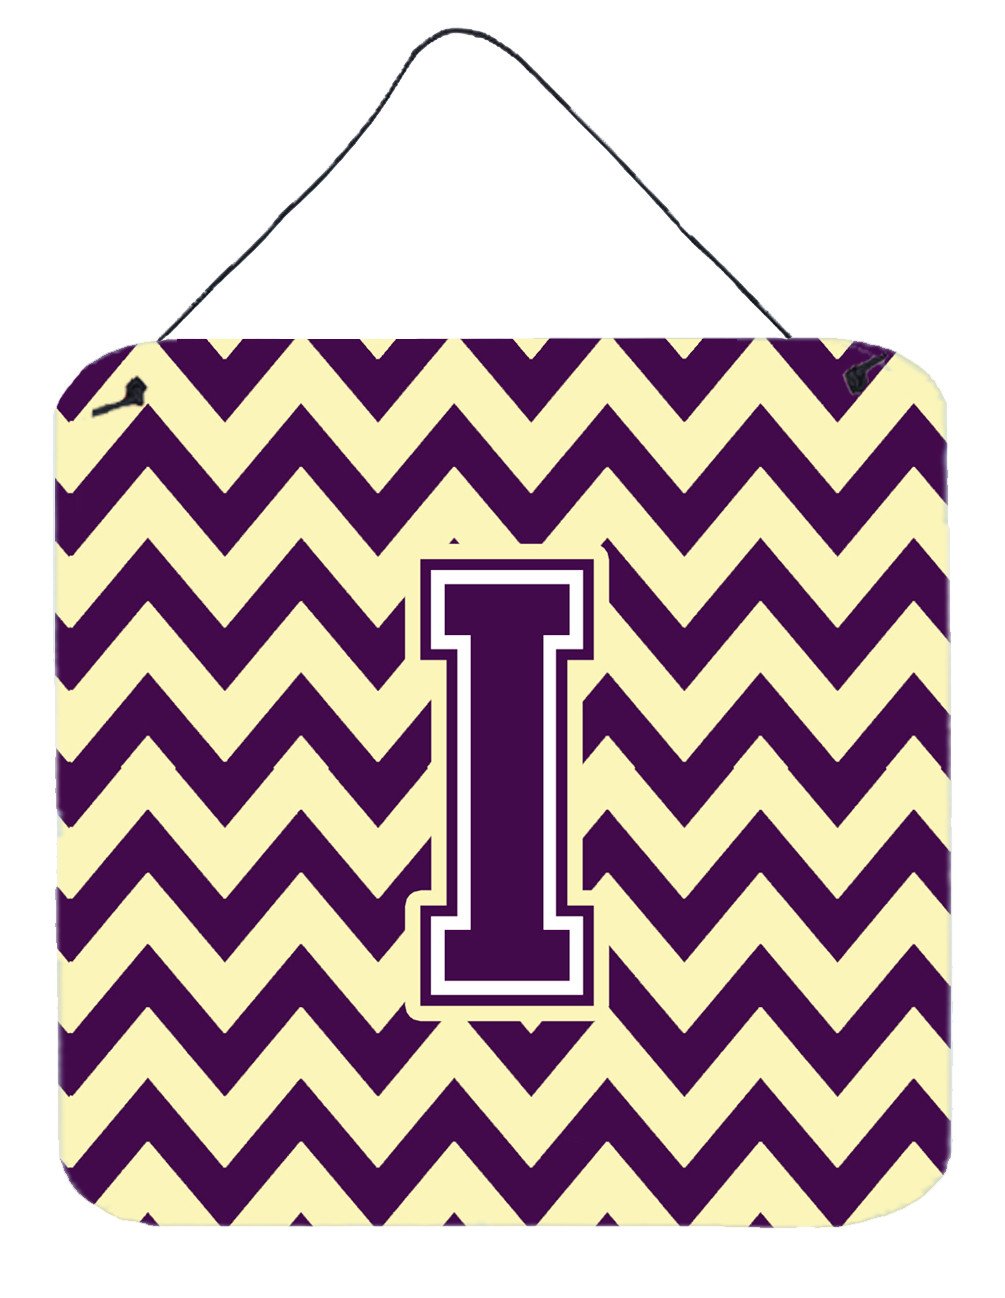 Letter I Chevron Purple and Gold Wall or Door Hanging Prints CJ1058-IDS66 by Caroline's Treasures